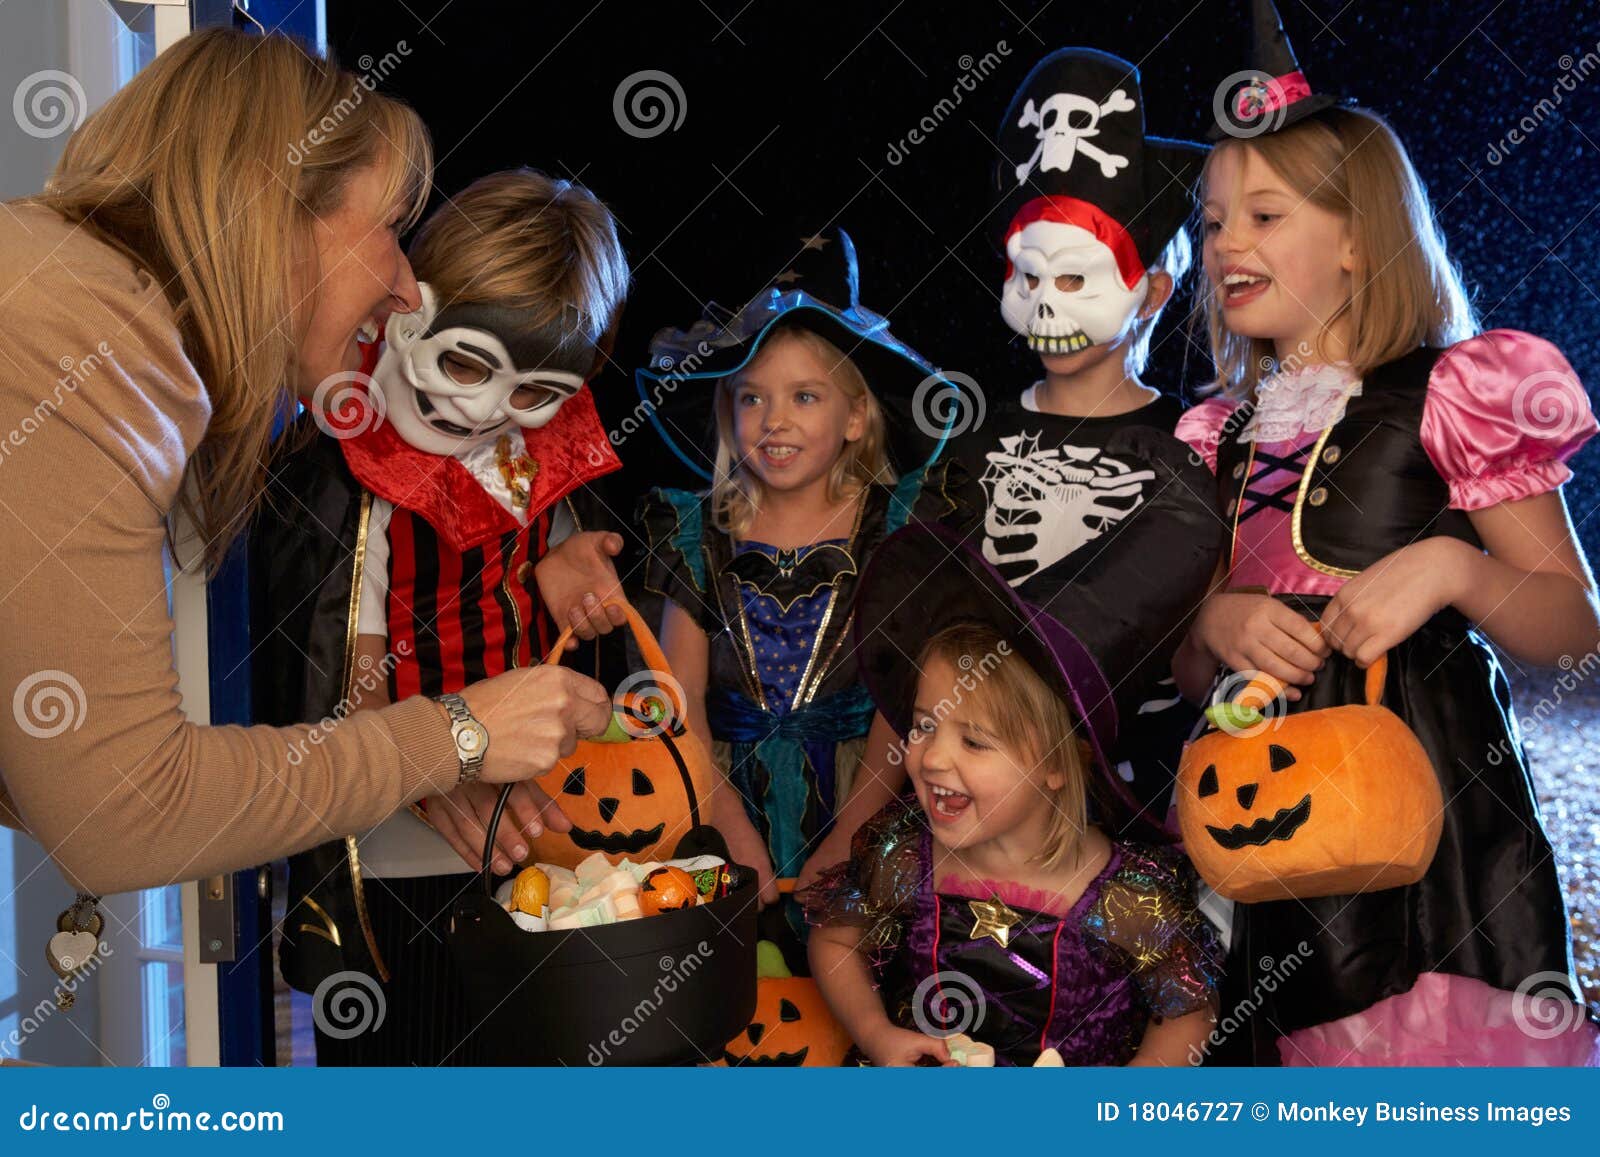 happy halloween party trick or treating